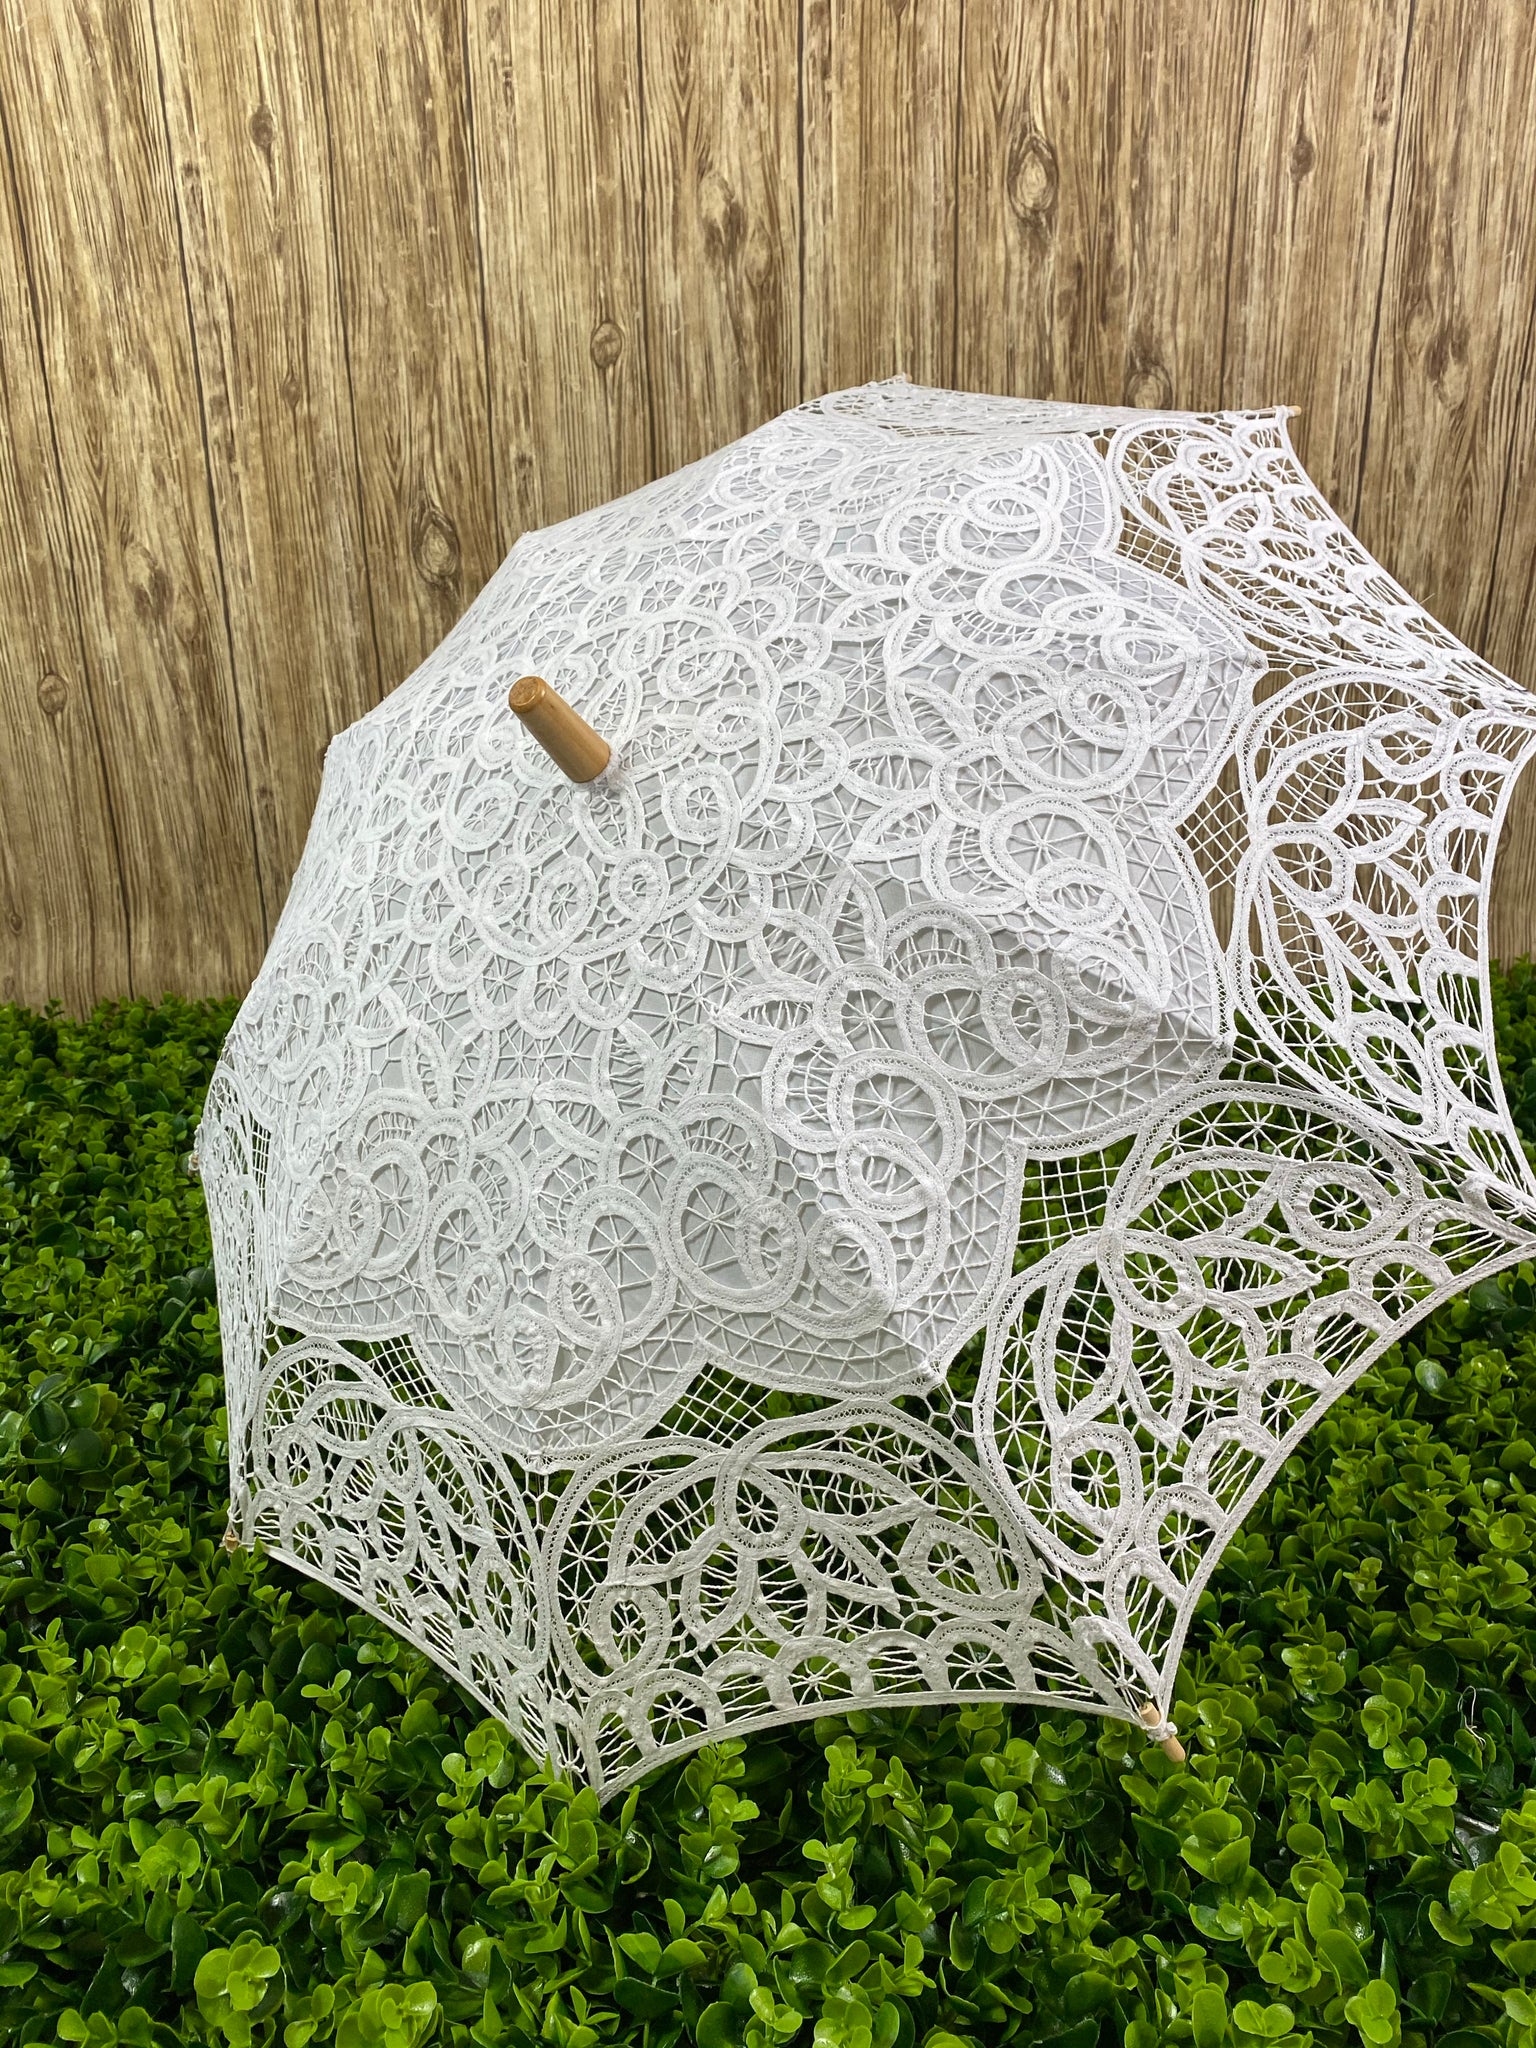 Ivory crochet umbrella Wooden handle Easy open and closure 100in around 37.7in diameter 26.5in tall Perfect for girls ages 8-14